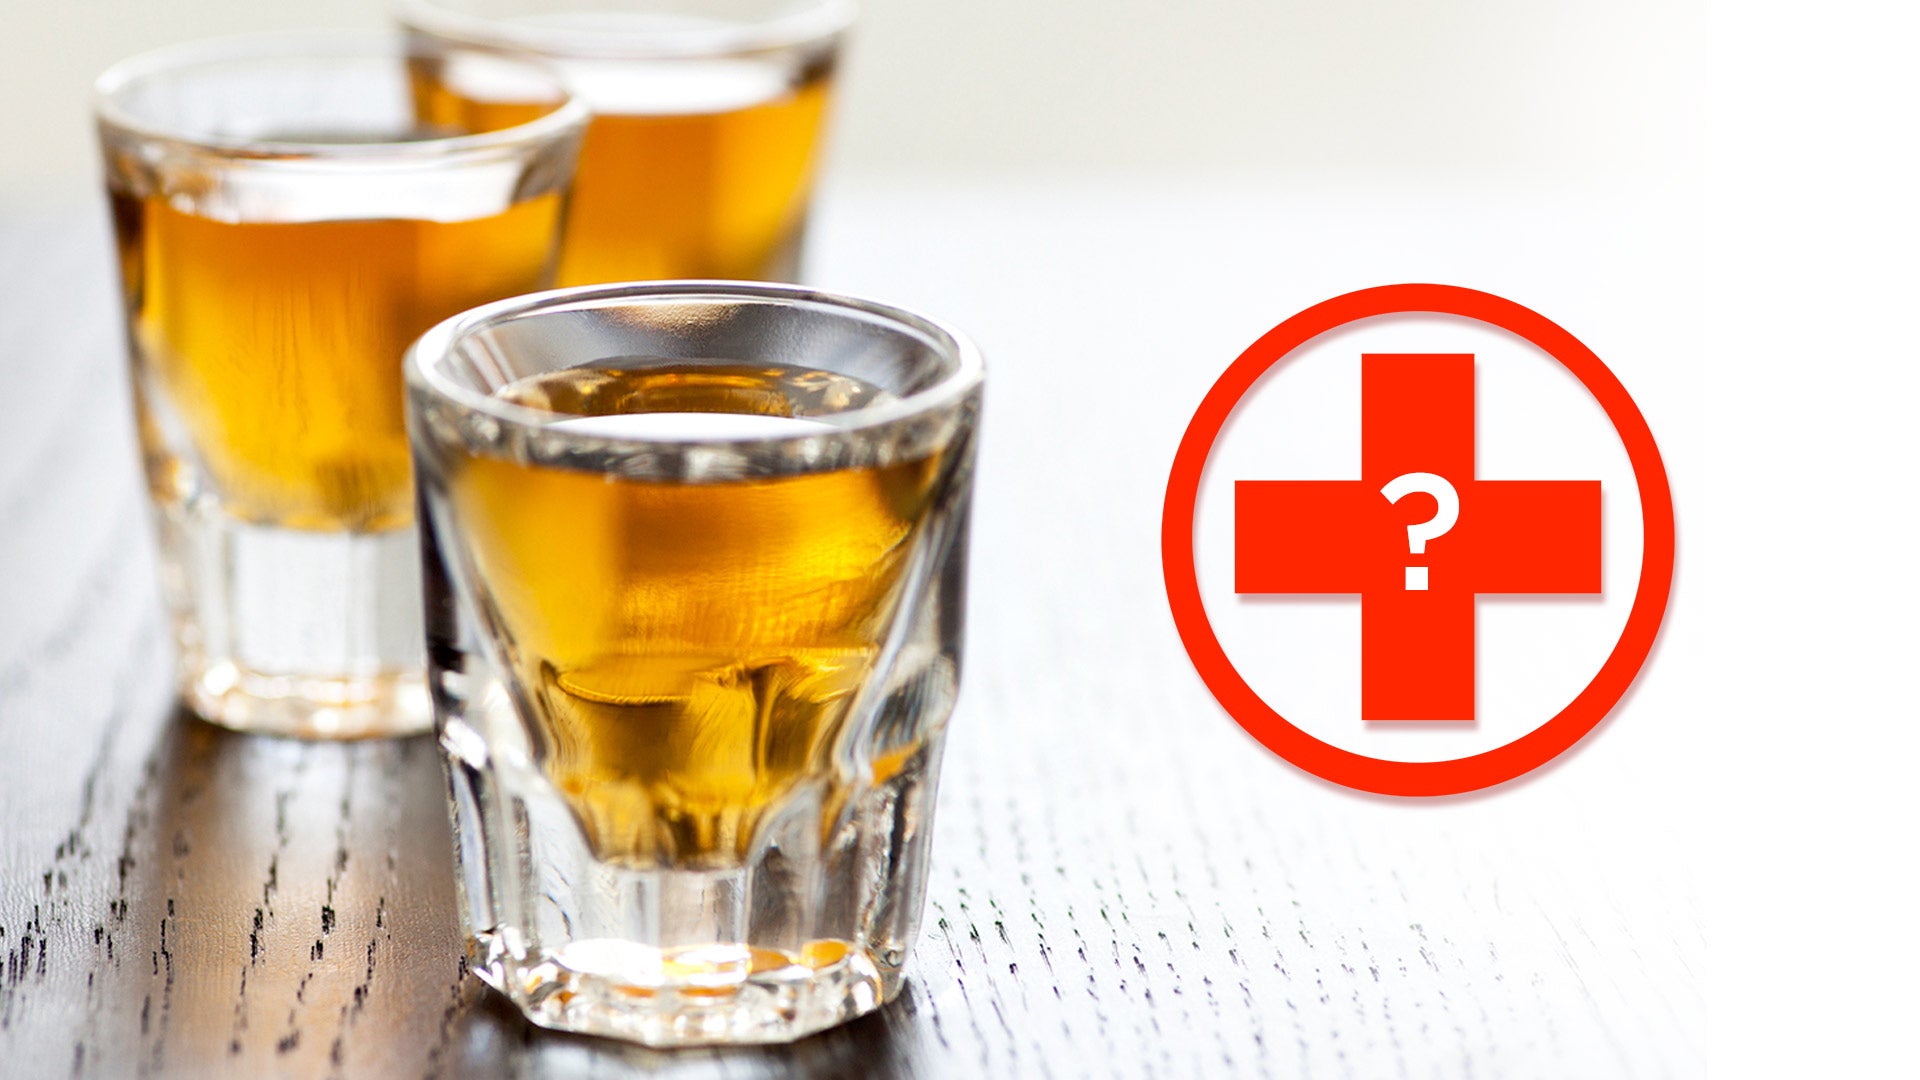 7 Health Benefits of Whisky You Didn't Know About